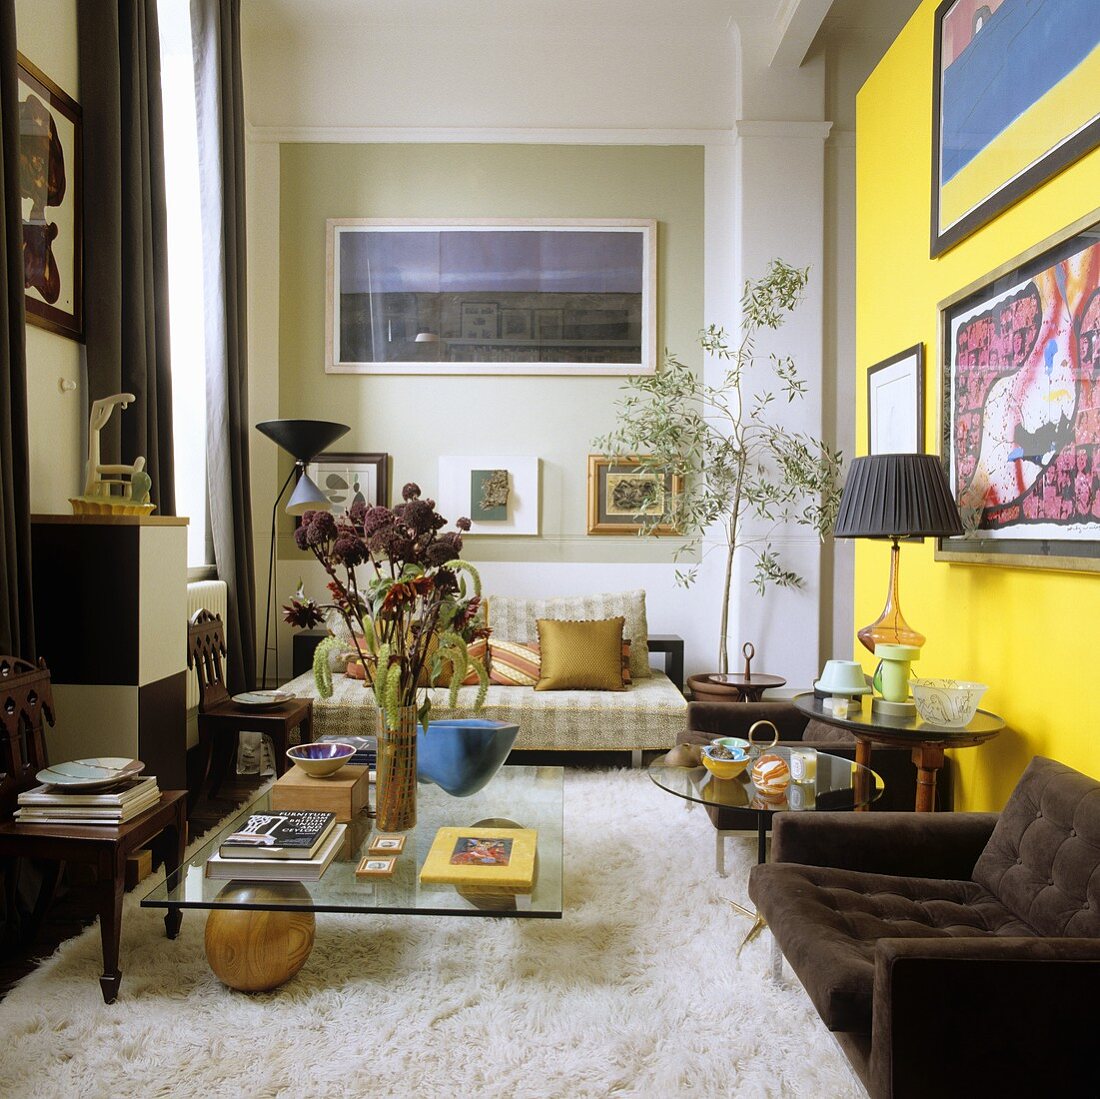 A high ceilinged, 70s-style living room with a flokati rug and a brown armchair in front of a yellow wall